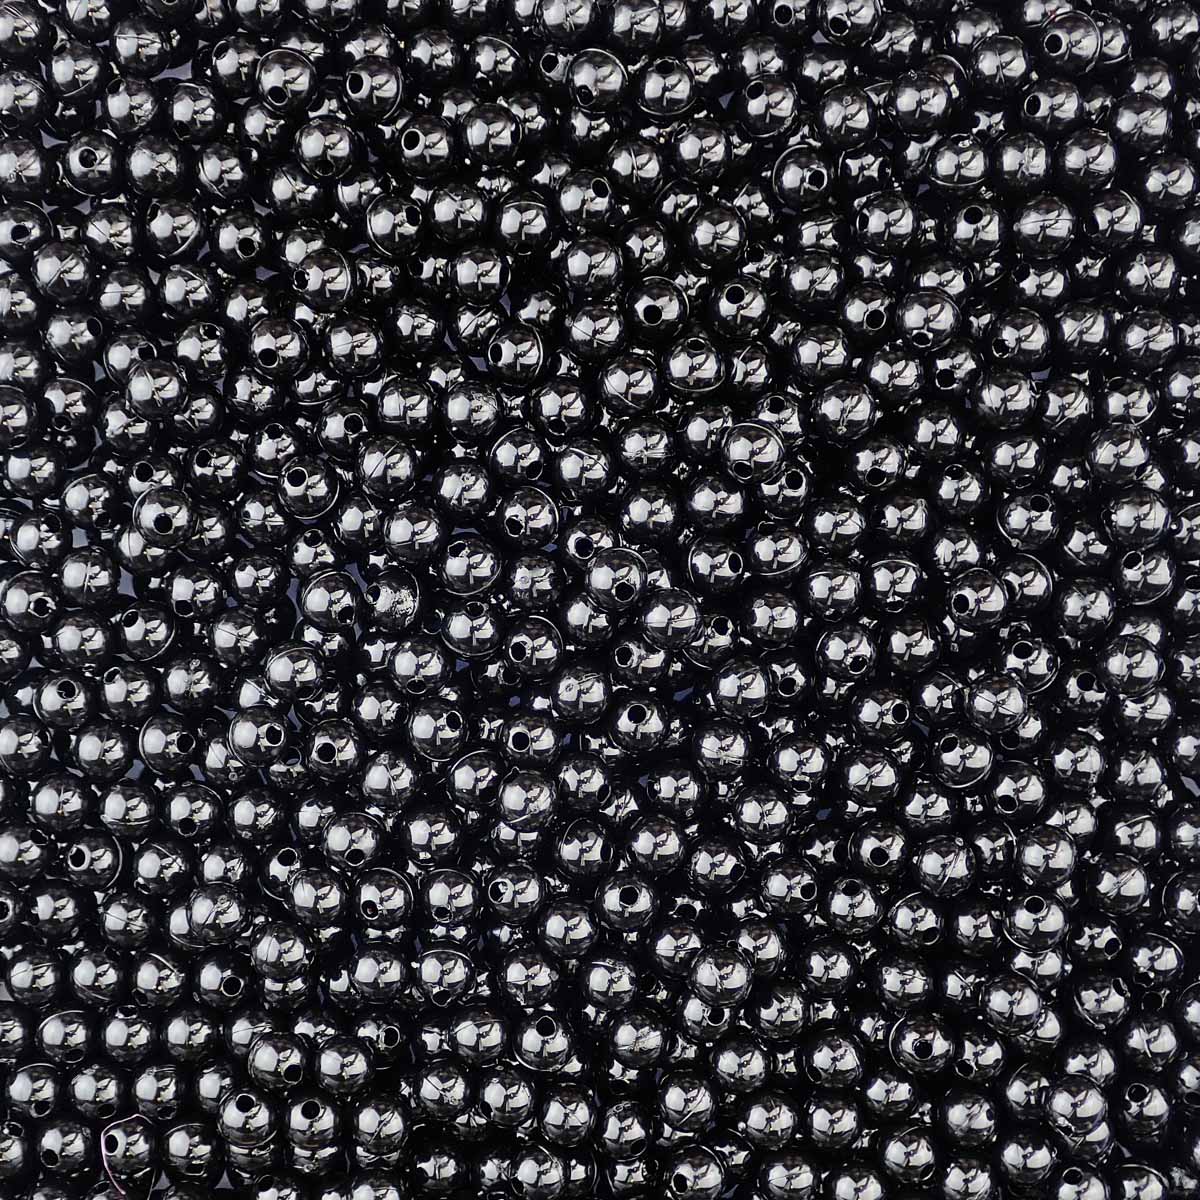 Plastic Black Vertical Hole Mixed Number Beads, 8mm Cube, 300 beads